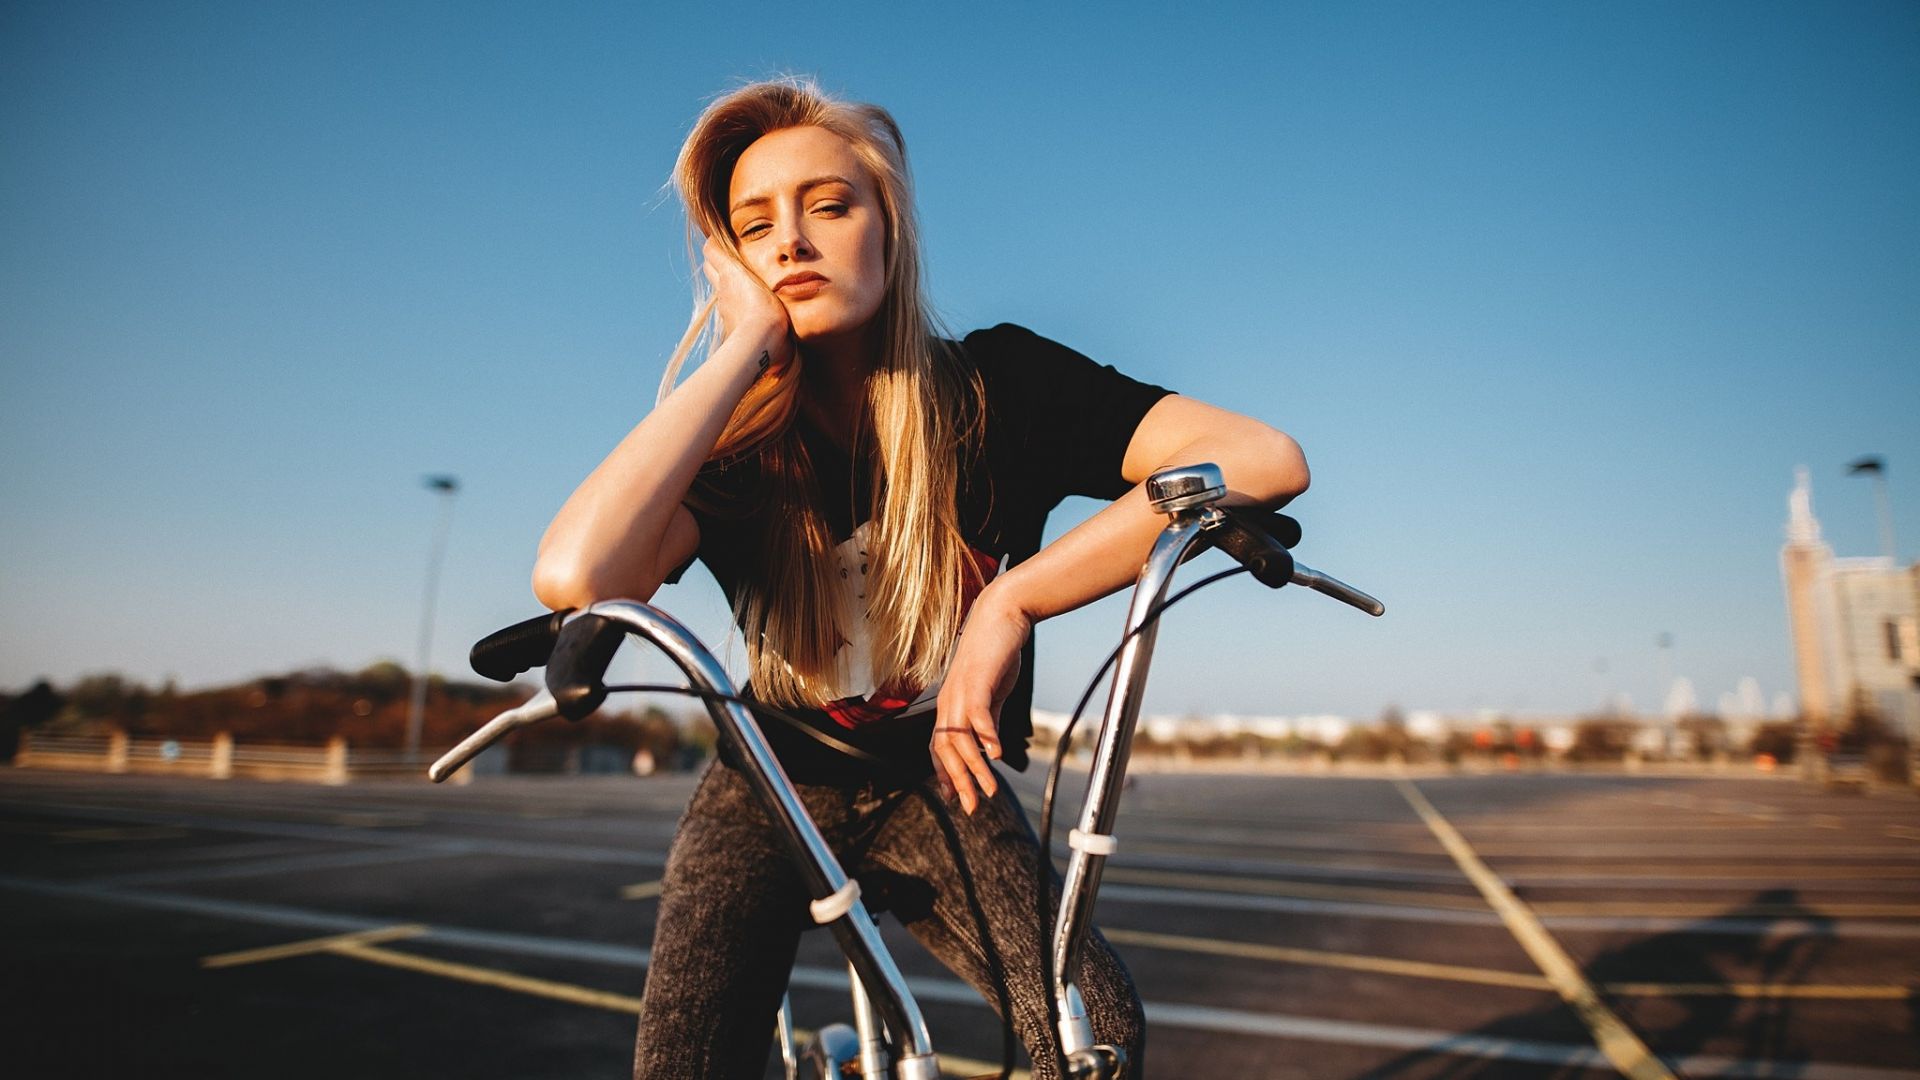 Wallpaper Riding bicycle, girl, model, blonde, outdoor